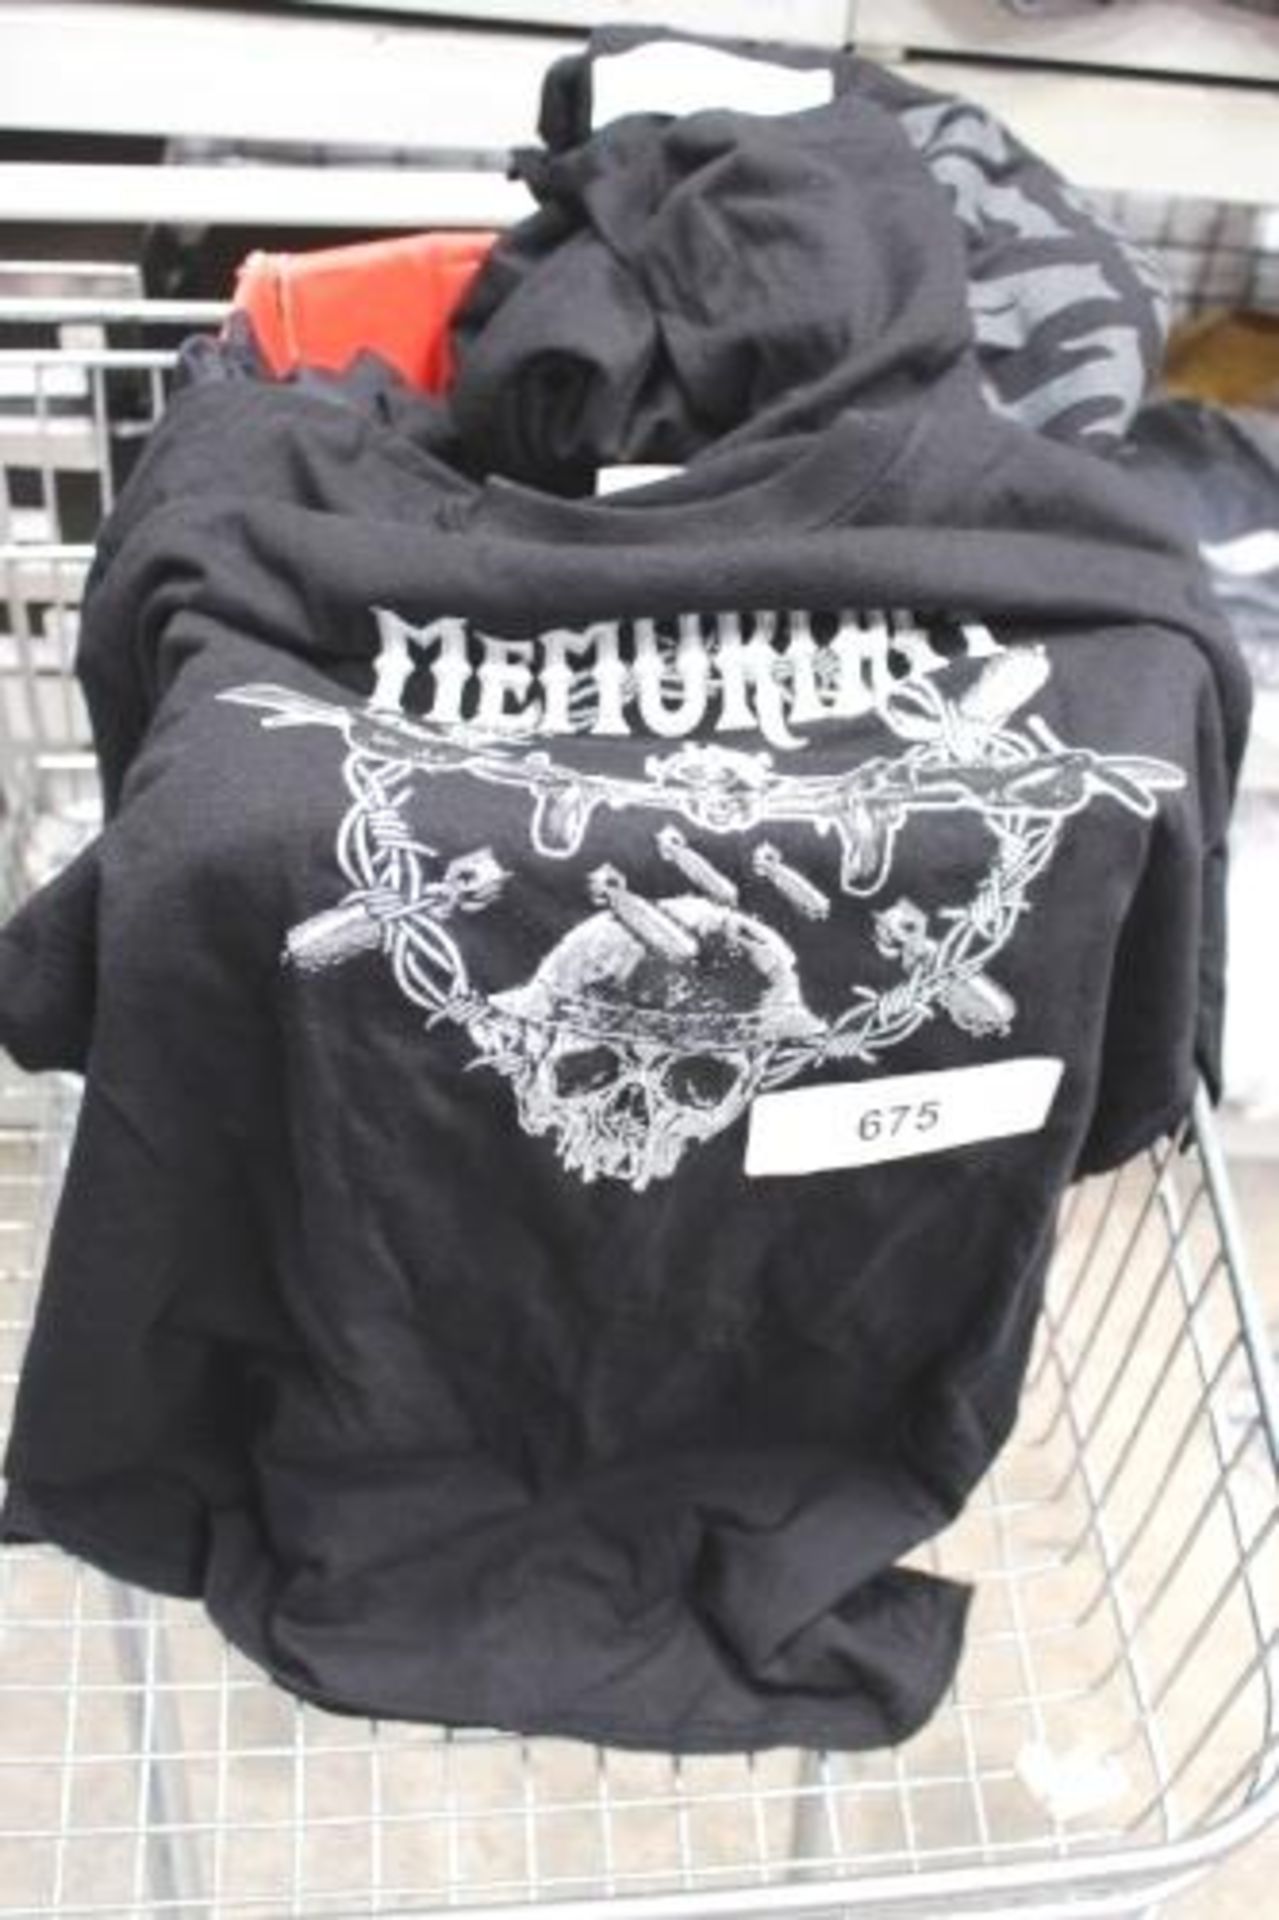 Approximately 30 Death Metal logo and graphic t-shirts, various sizes - New (ES9C)